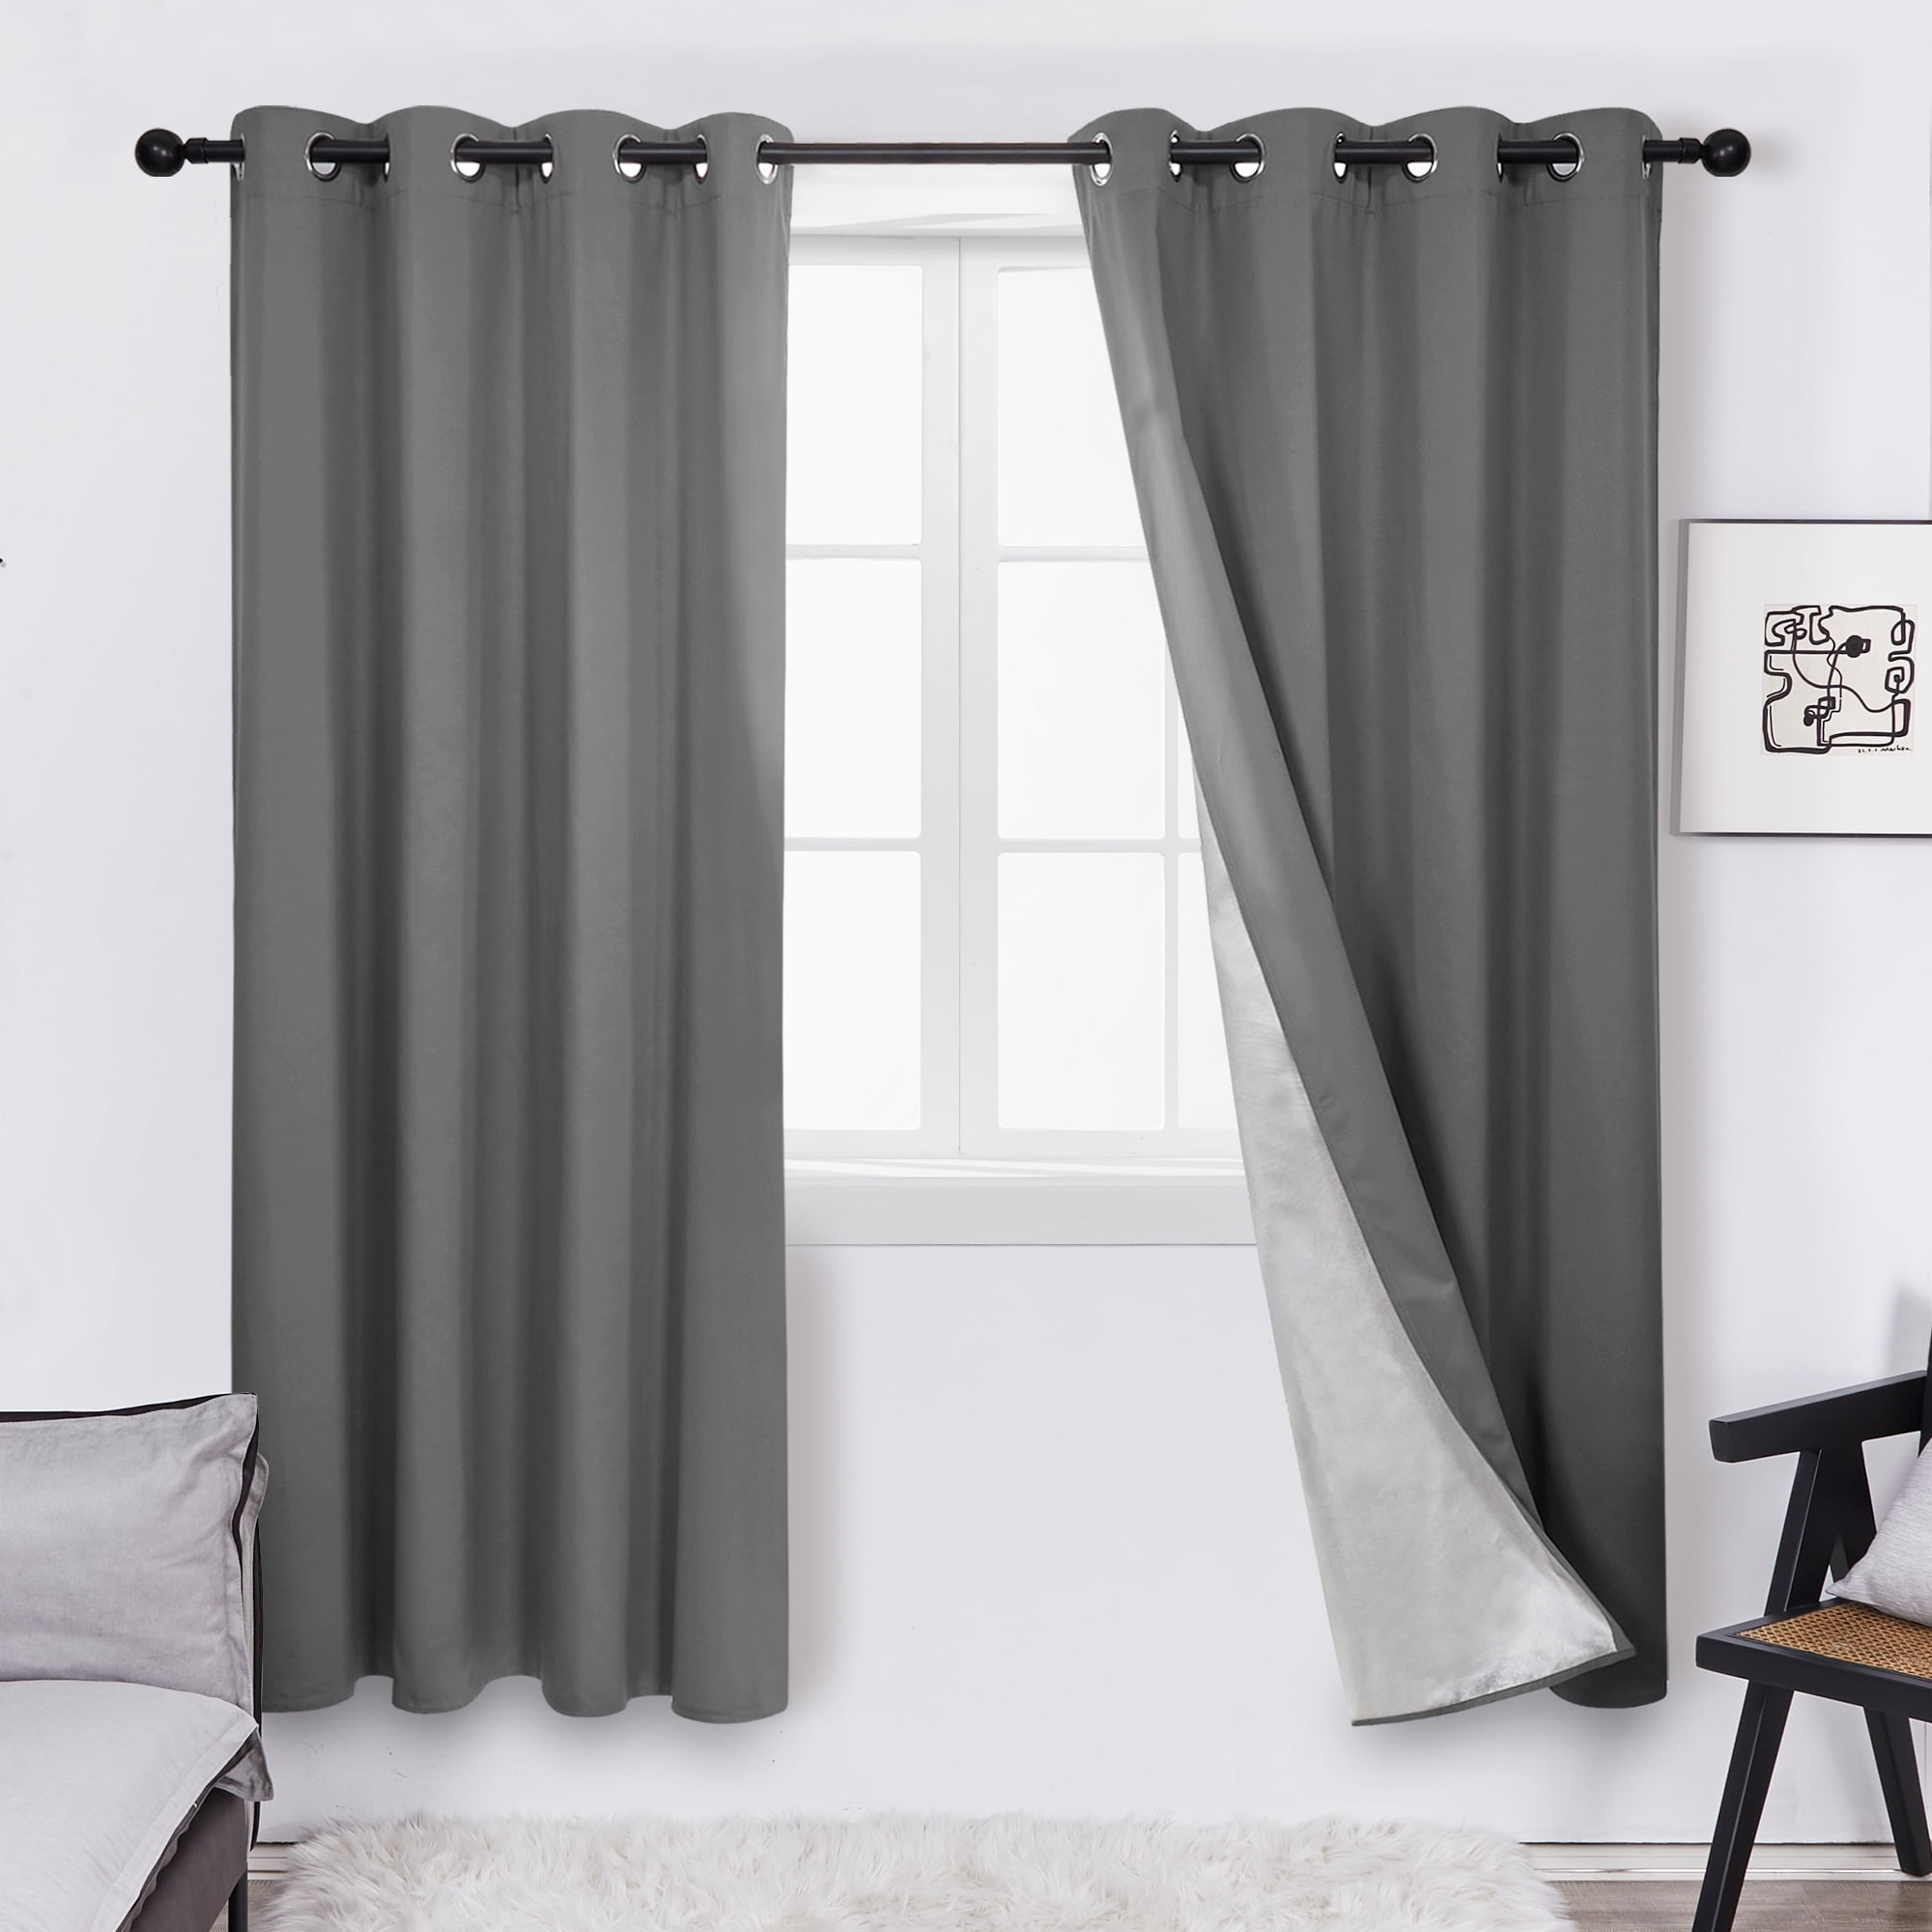 Details about   Window Curtains Blackout Room Thermal Insulated 2 Panels 52x95" Utopia Bedding 